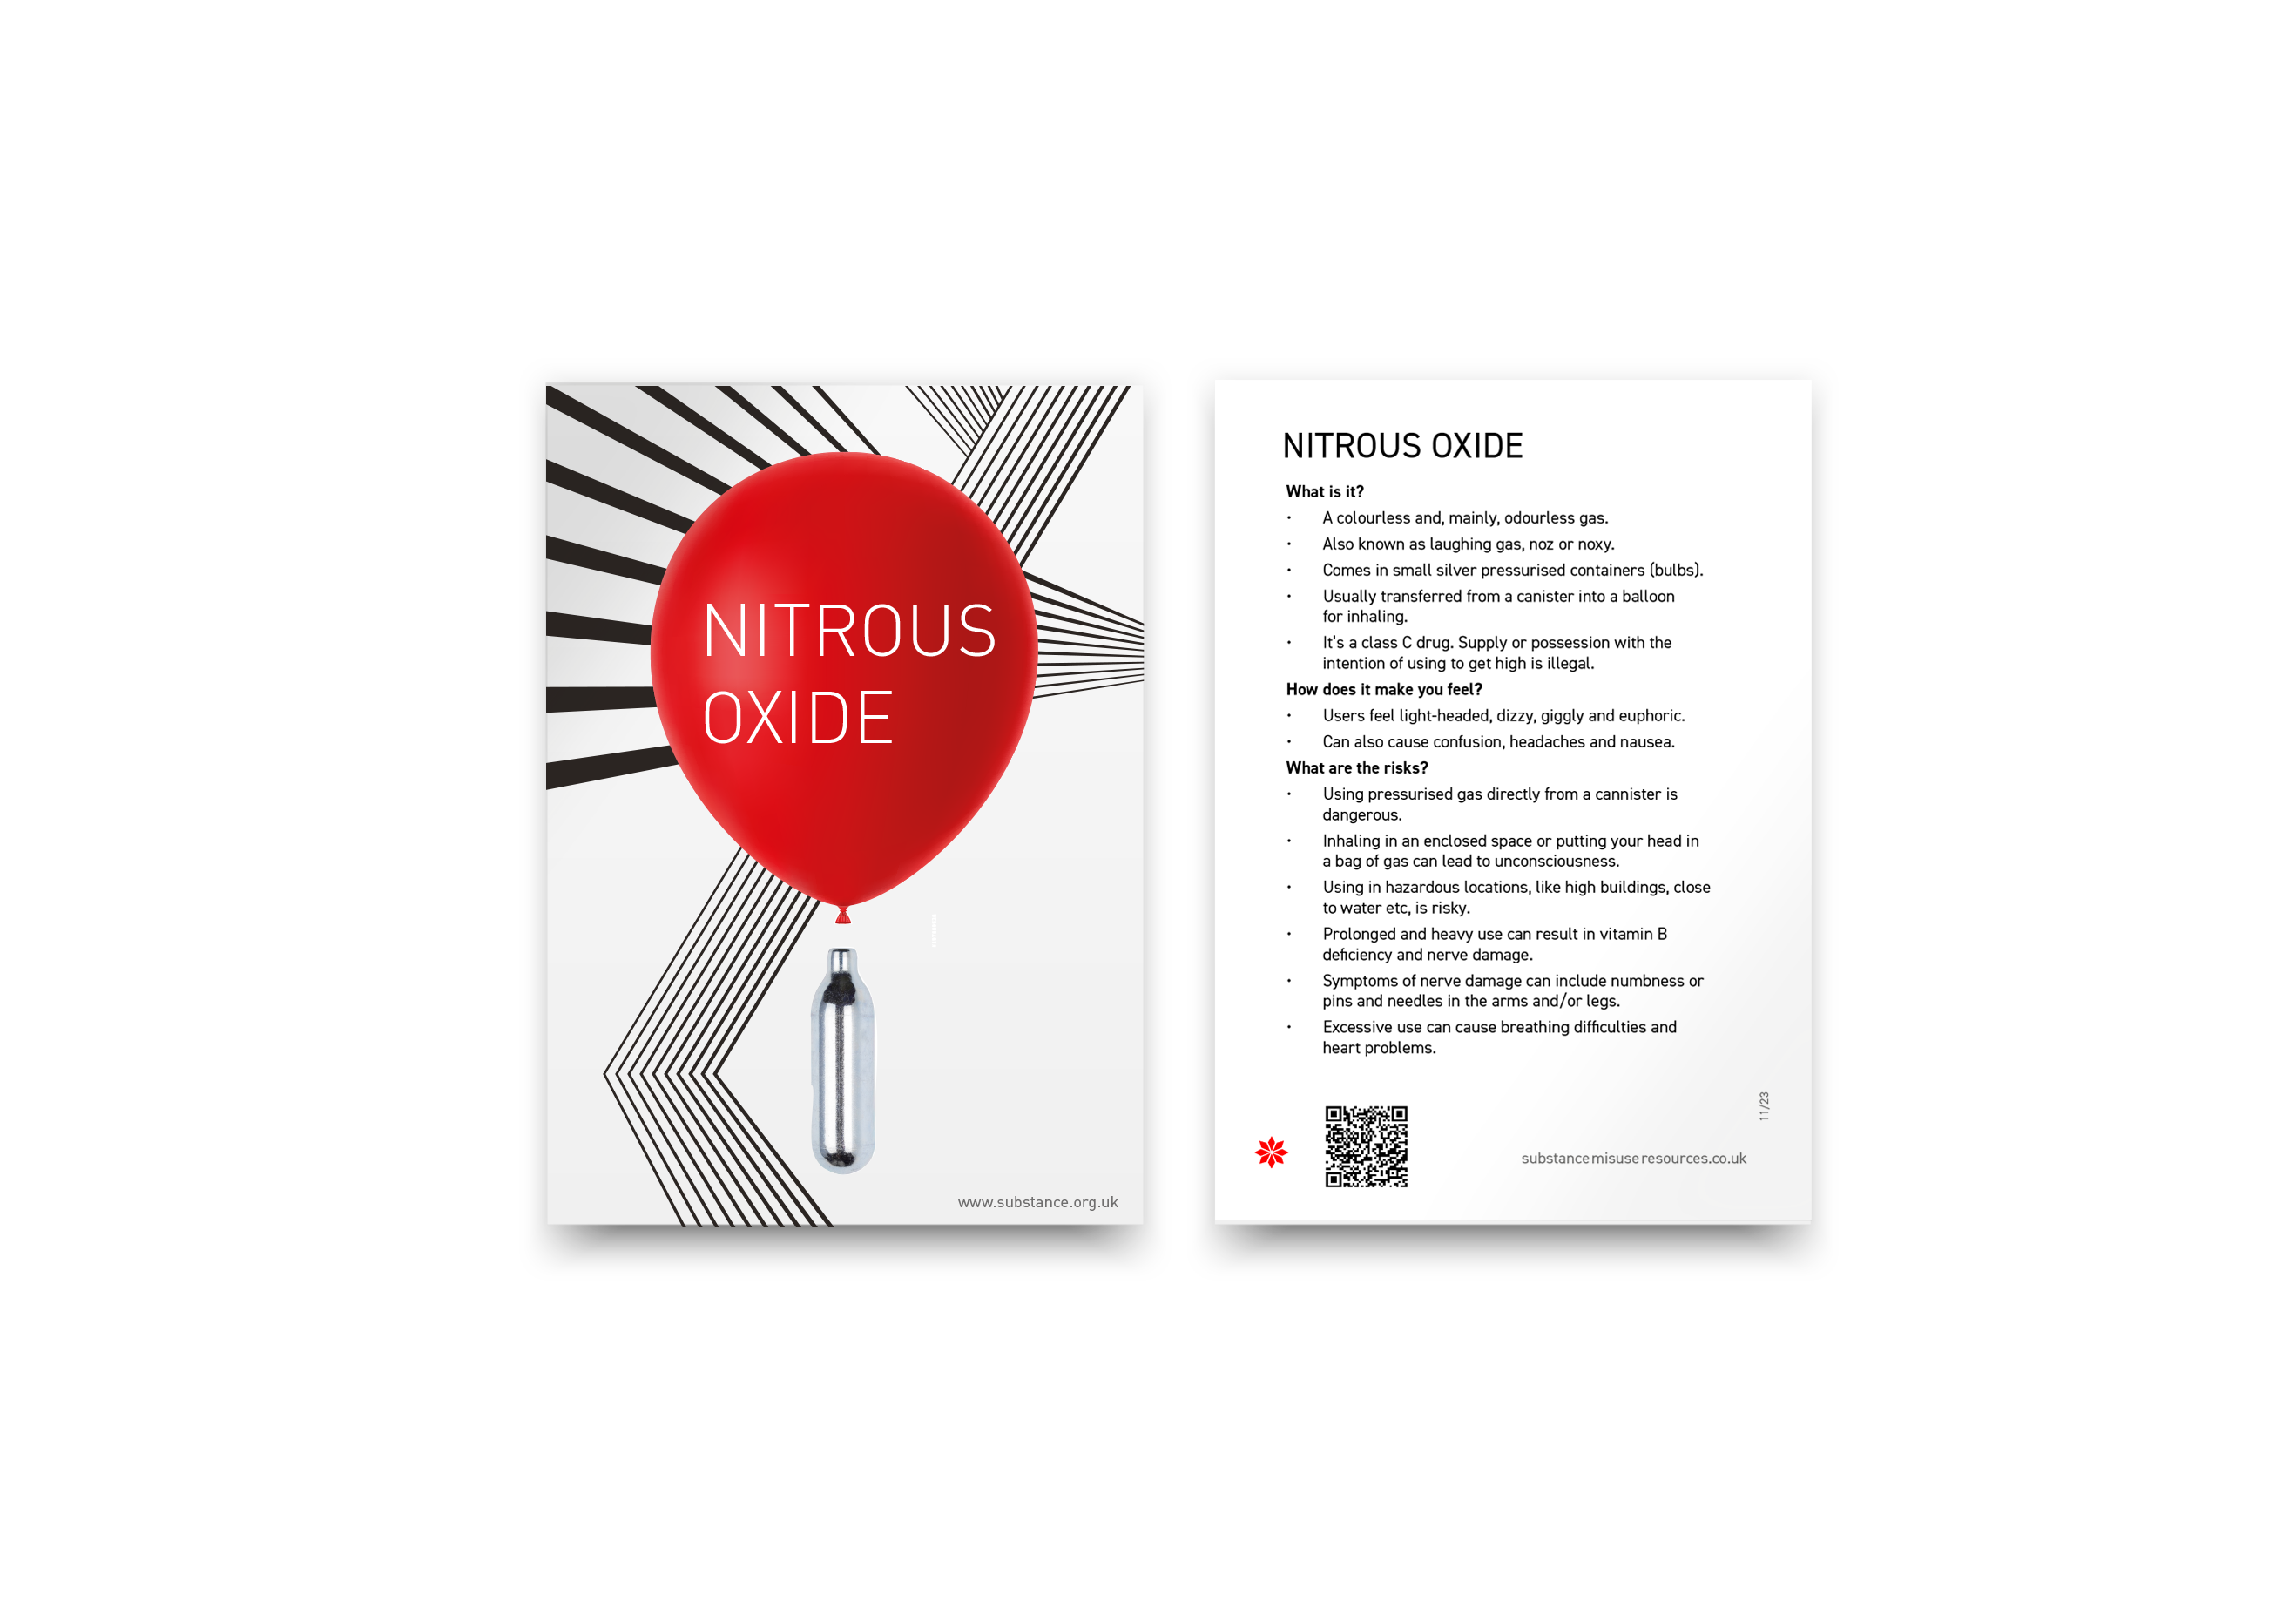 A6, postcard style, Nitrous oxide information resource. Nitrous oxide balloon on the front and Nitrous oxide information on reverse